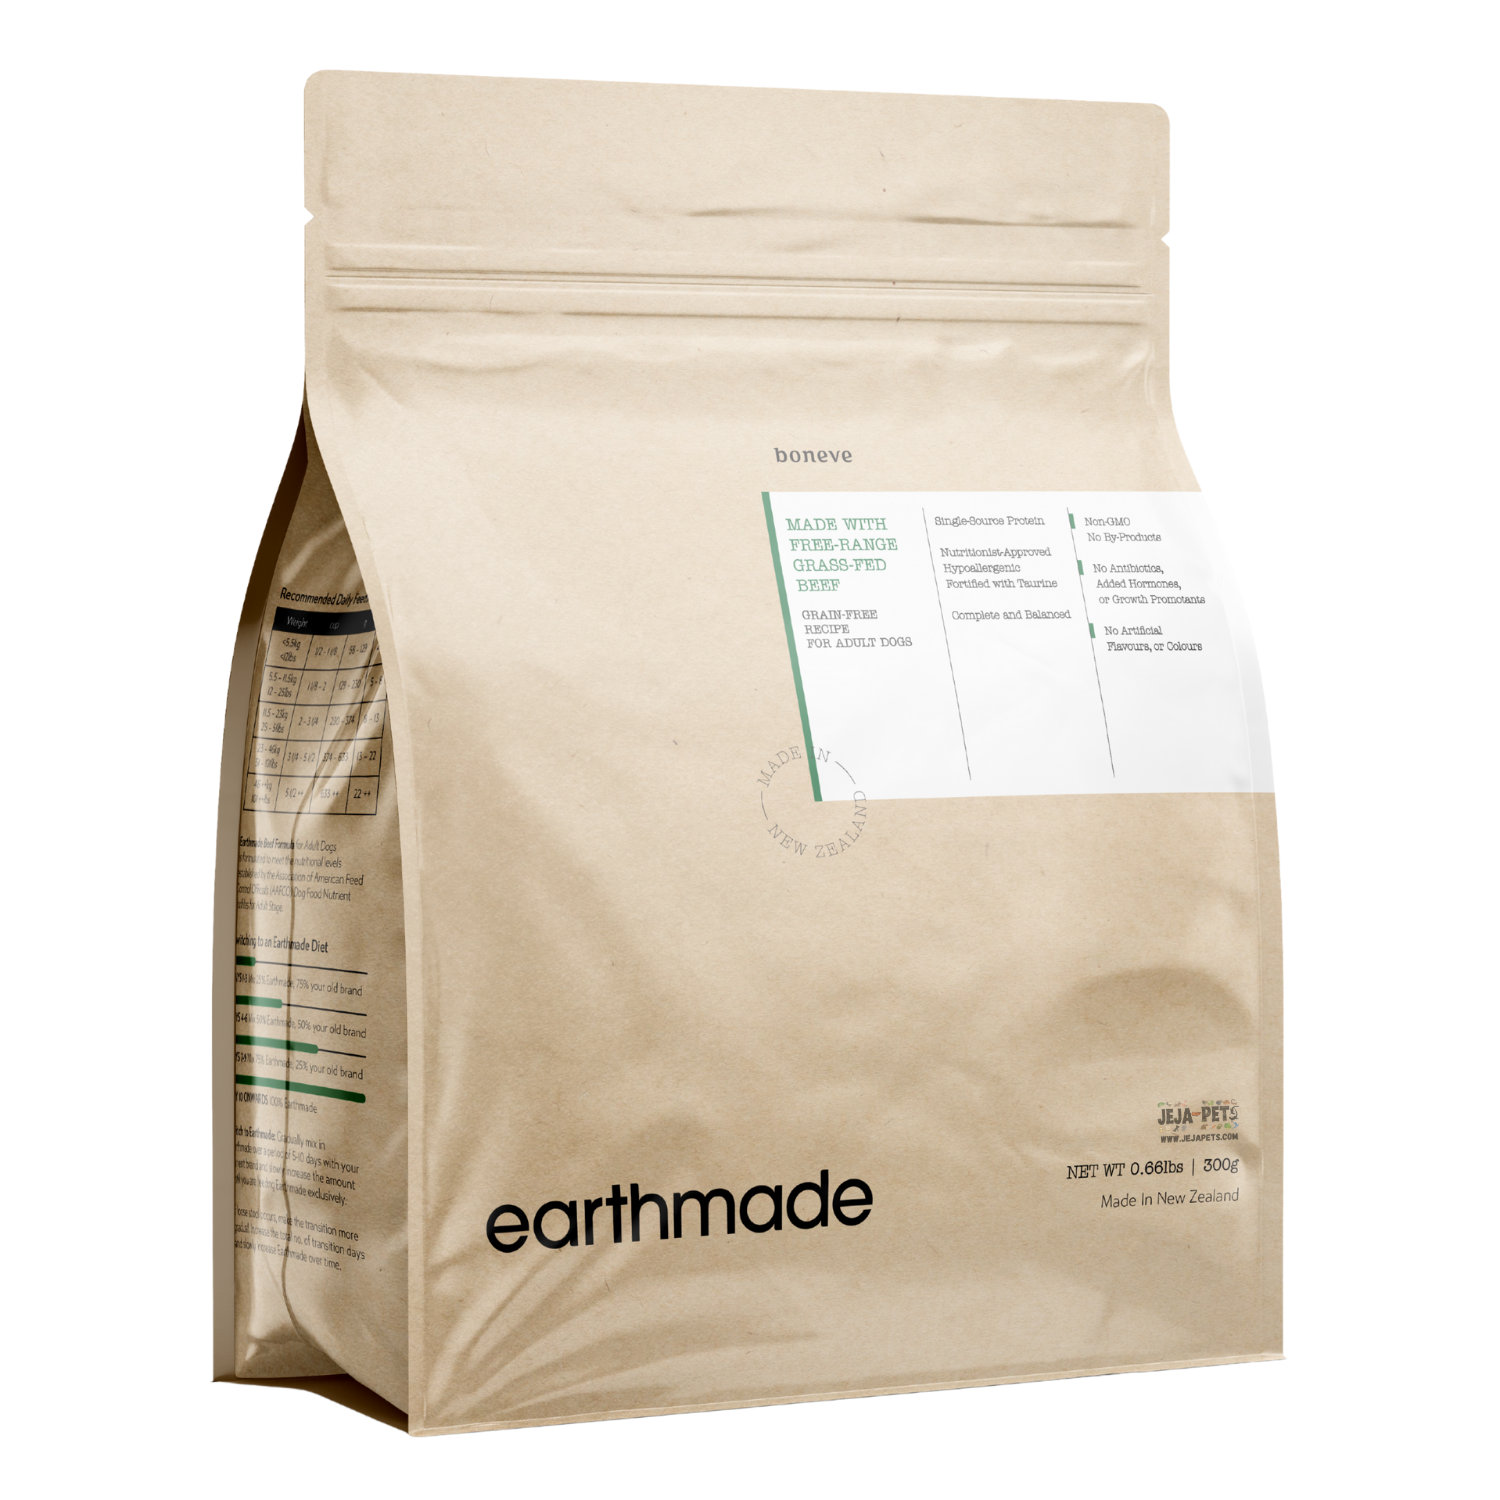 [PROMO] Earthmade Dry Food (Free Range Grass-Fed Beef) for Dogs - 300g / 1.36kg / 4.99kg